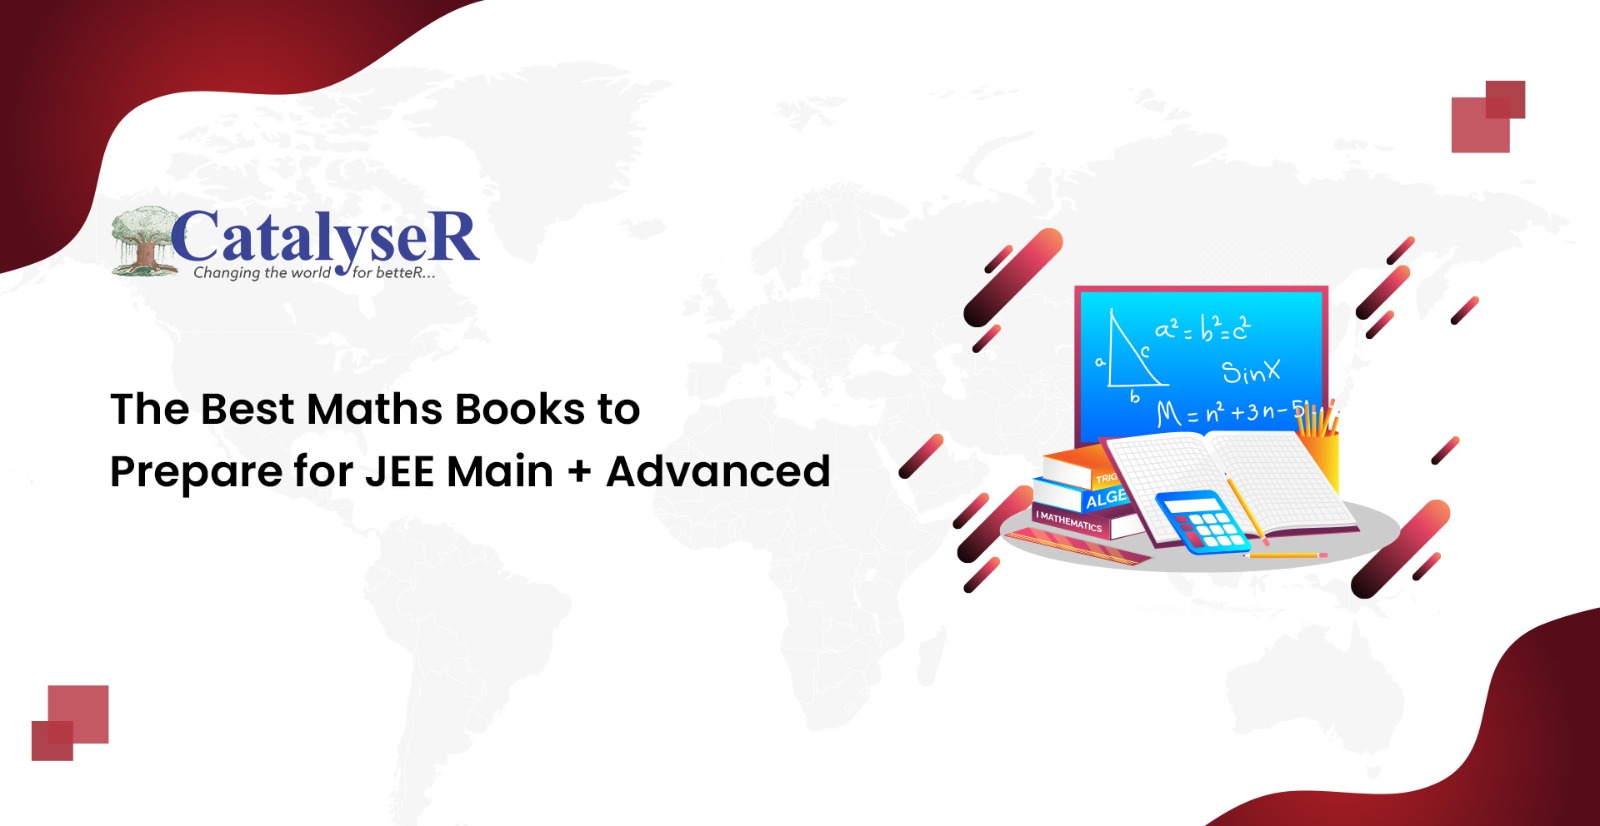 The Best Maths Books to Prepare for JEE Main + Advanced